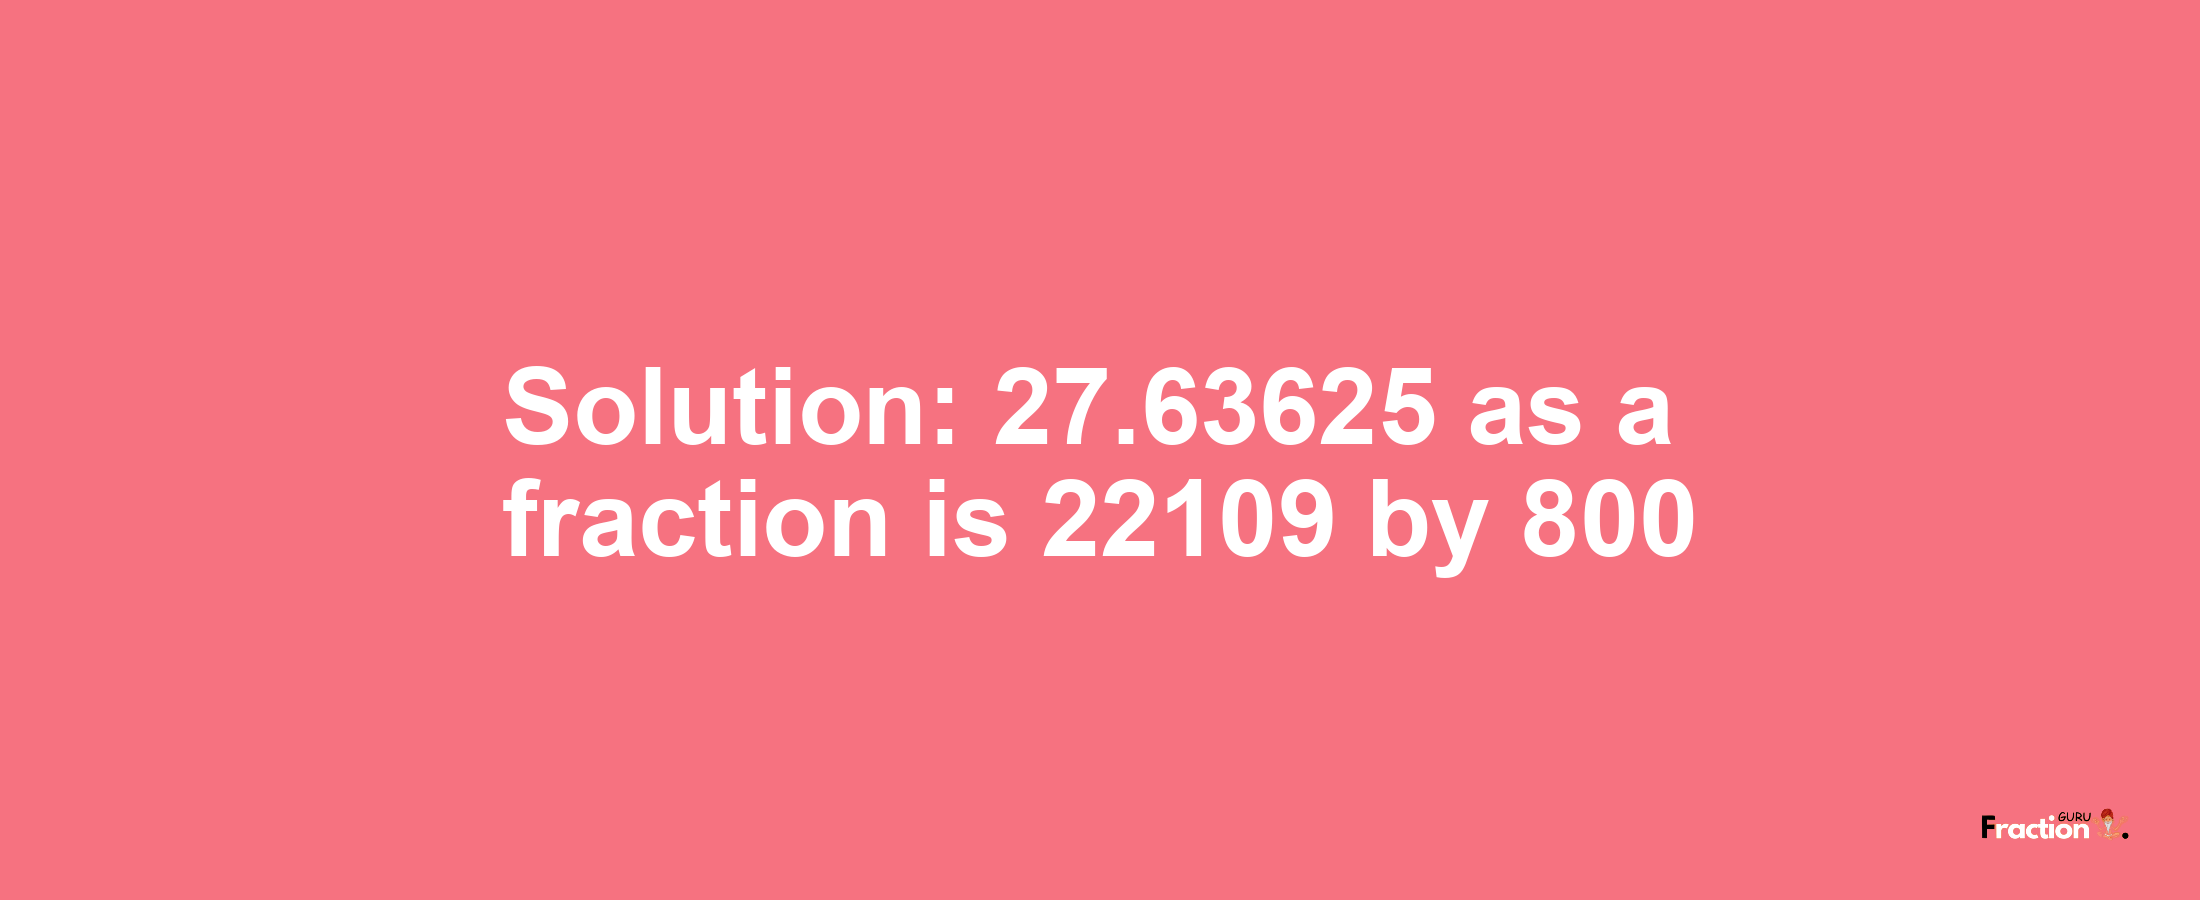 Solution:27.63625 as a fraction is 22109/800